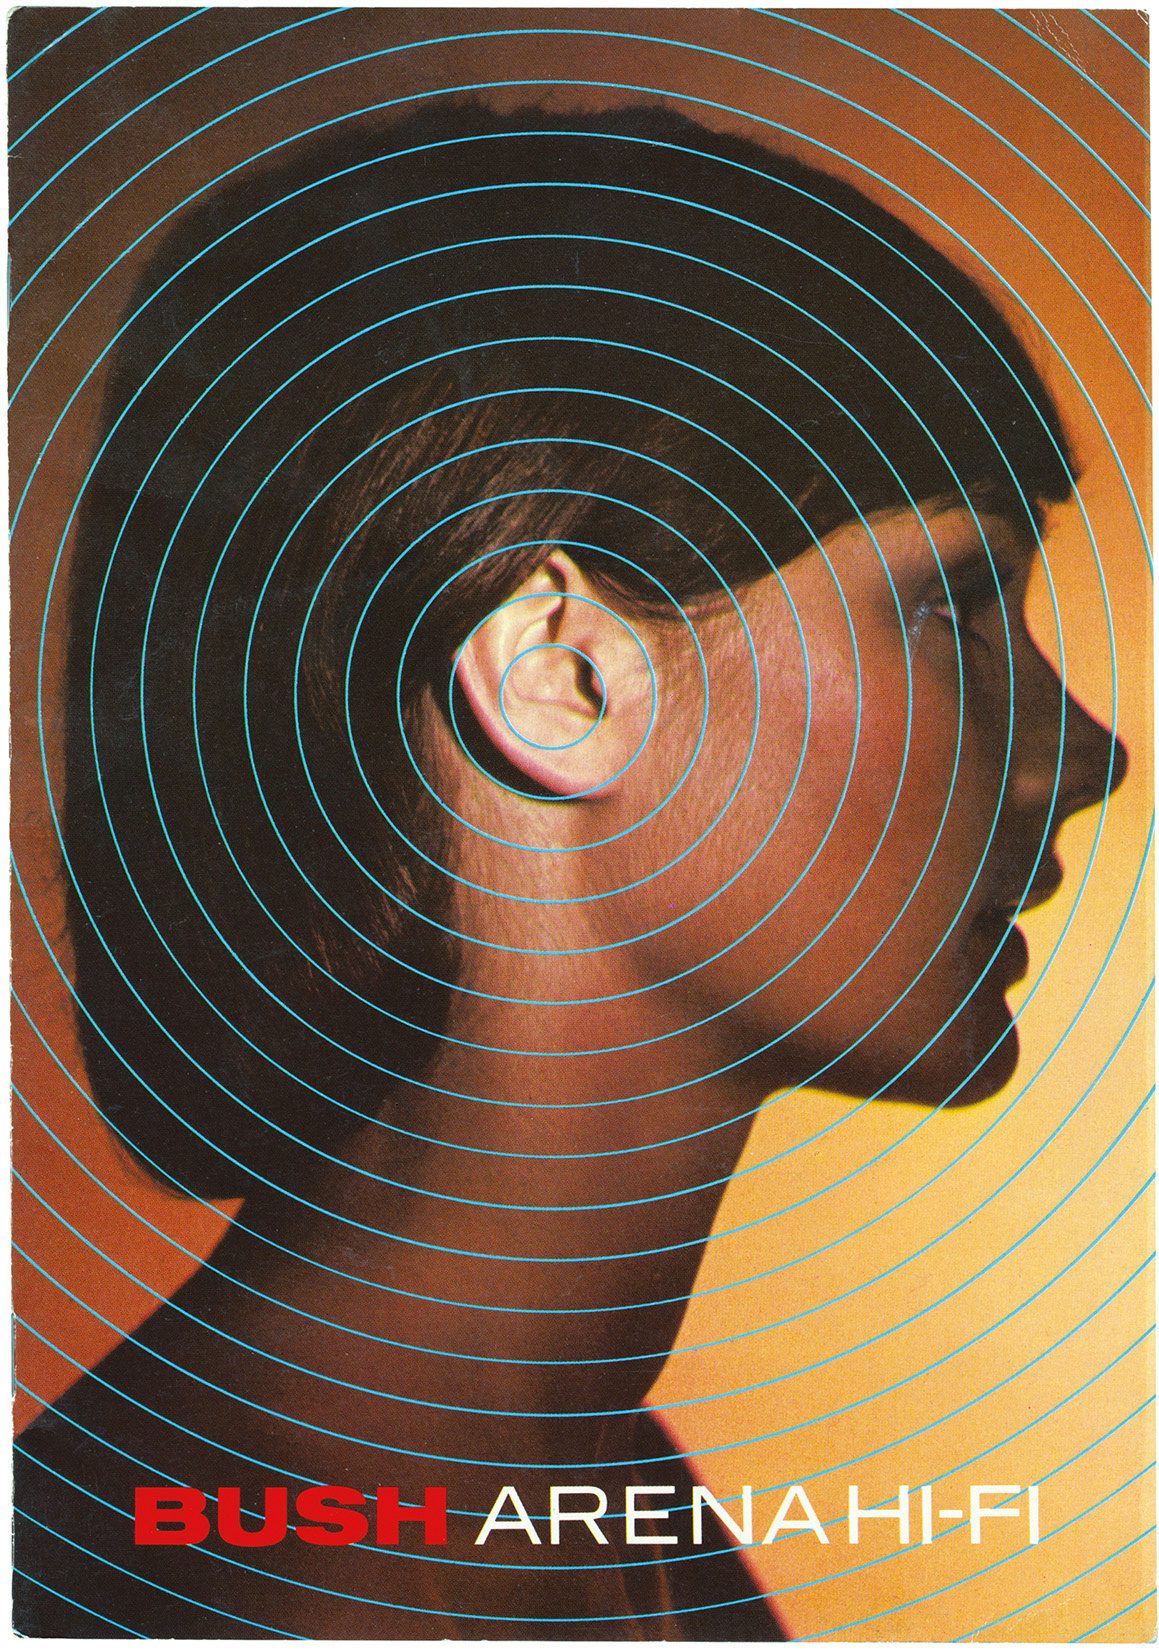 Poster featuring a profile shot of a person with shoulder length hair against an orange hued background, overlaid with a concentric circle pattern